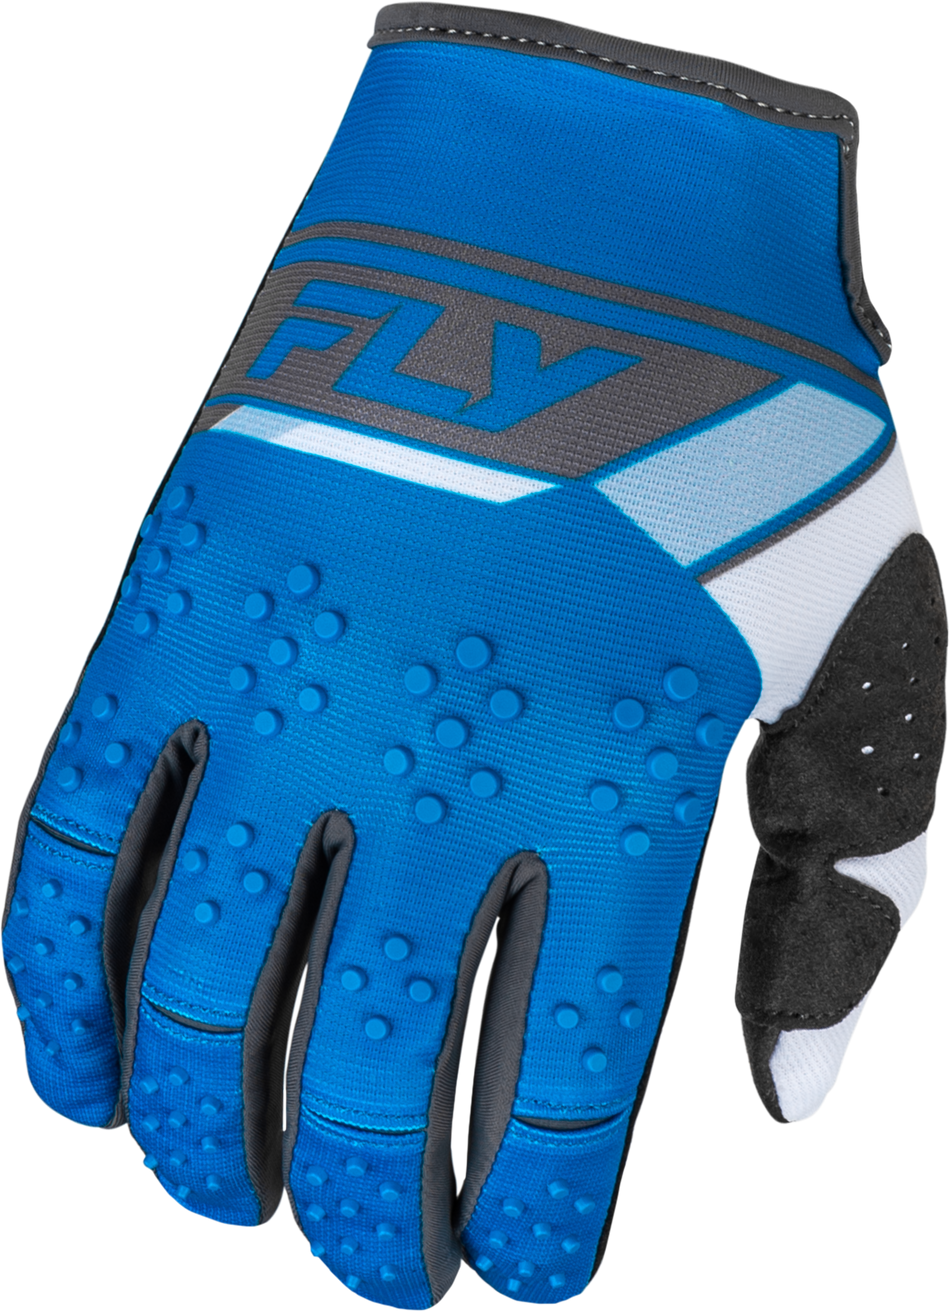 FLY RACING Youth Kinetic Prix Gloves Bright Blue/Charcoal Yl 377-410YL